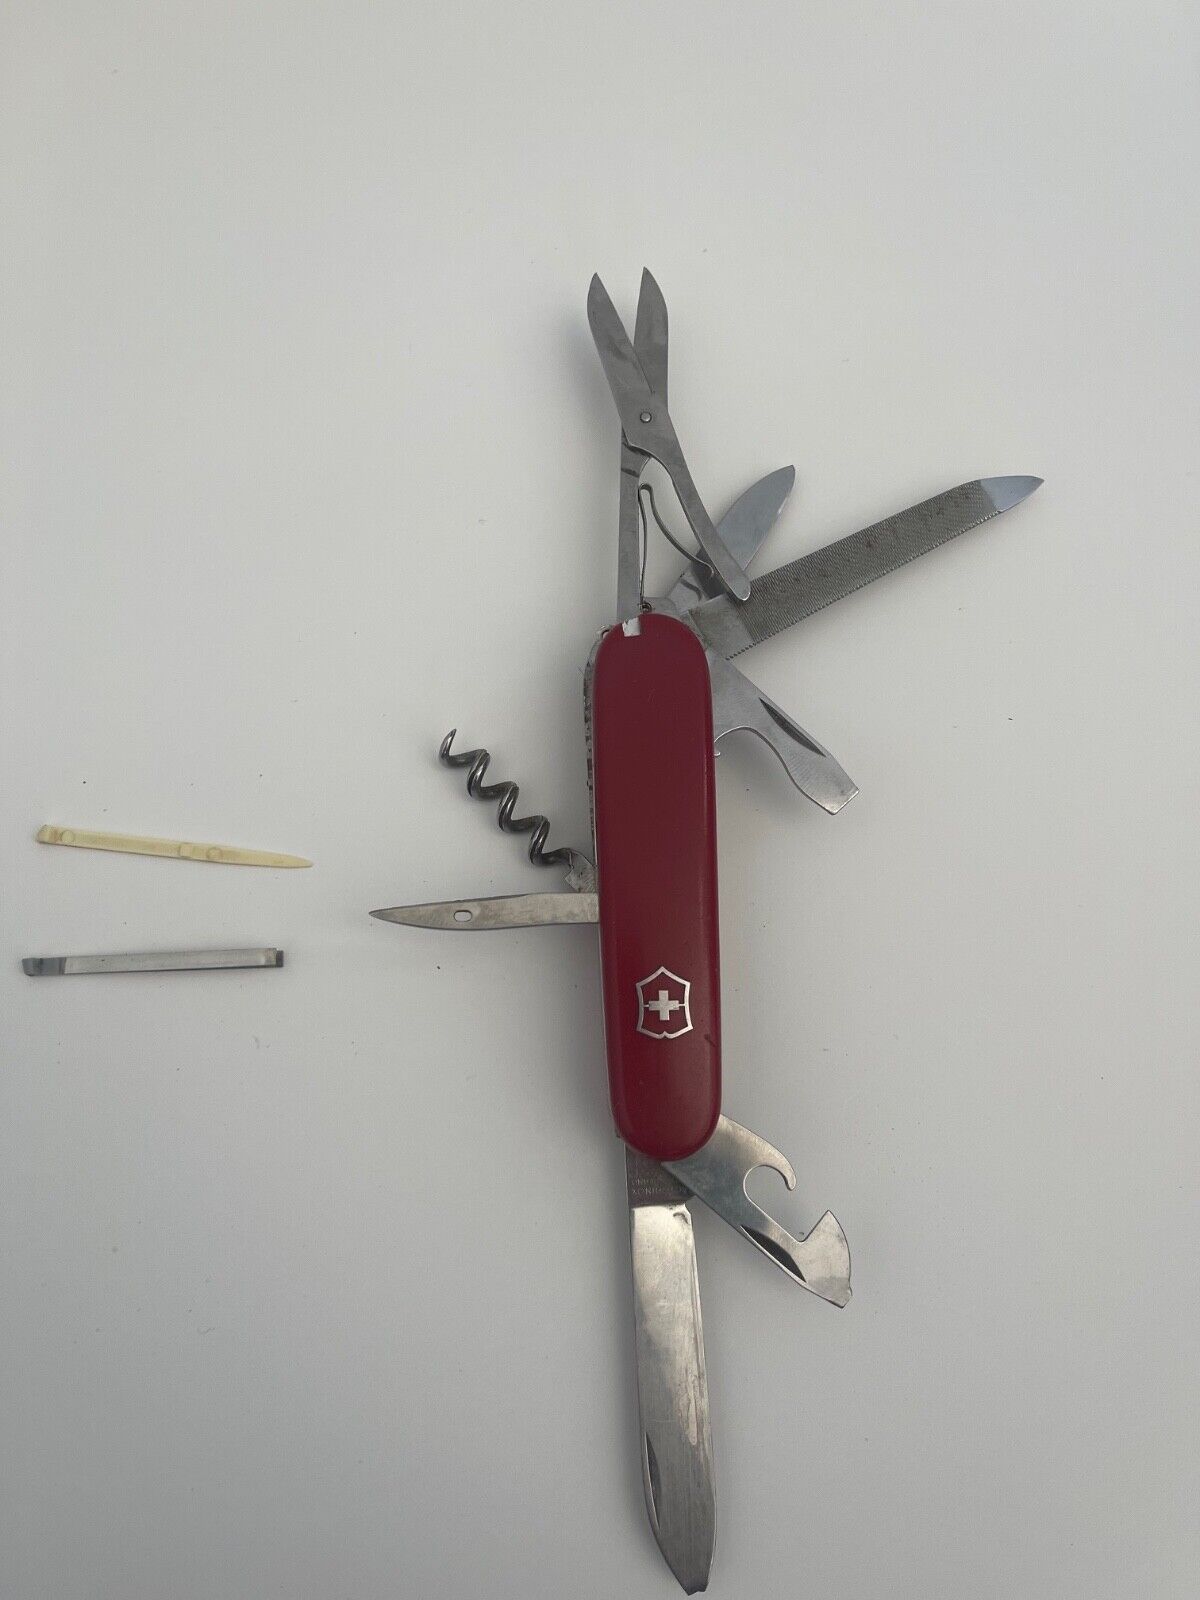  Swiss Army Knife, Victorinox Camper, contains 7 tools, red, 3 blades, camping